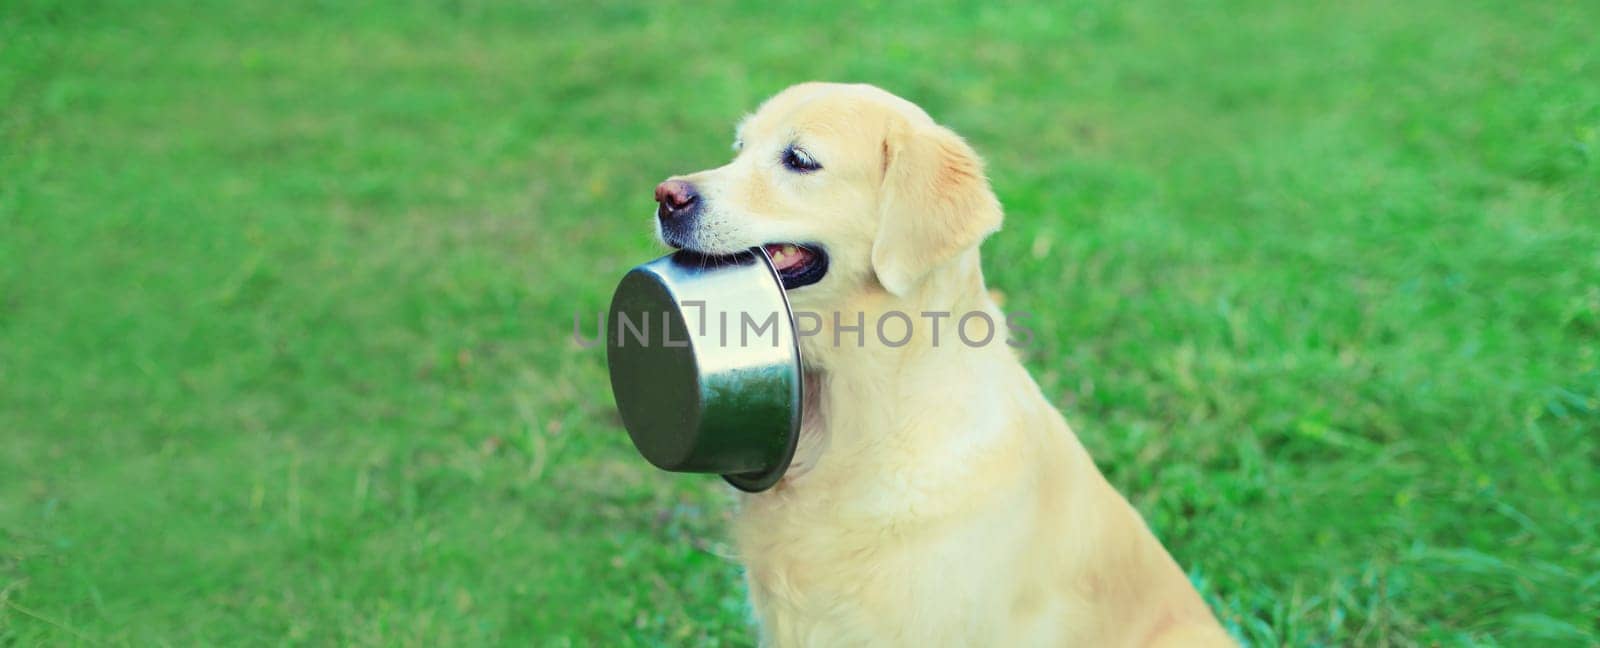 Golden Retriever dog holds empty bowl in teeth asking for food outdoors in summer park